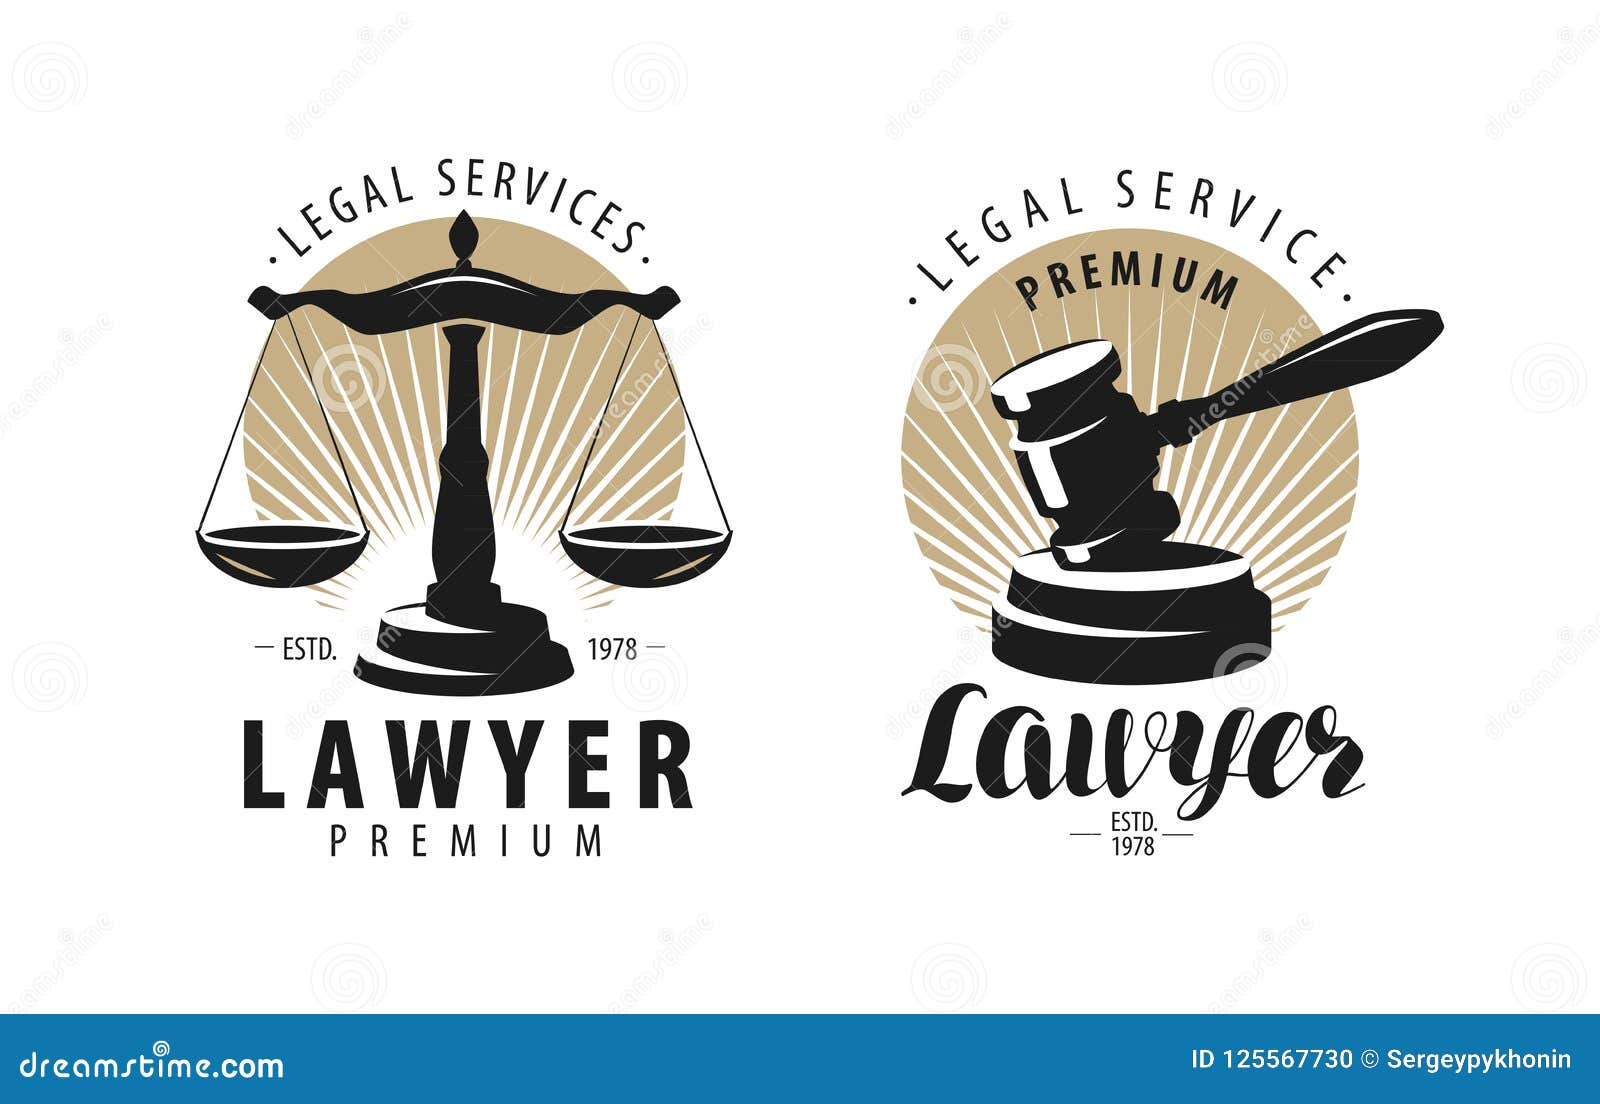 law office, attorney, lawyer logo or label. scales of justice, gavel .  